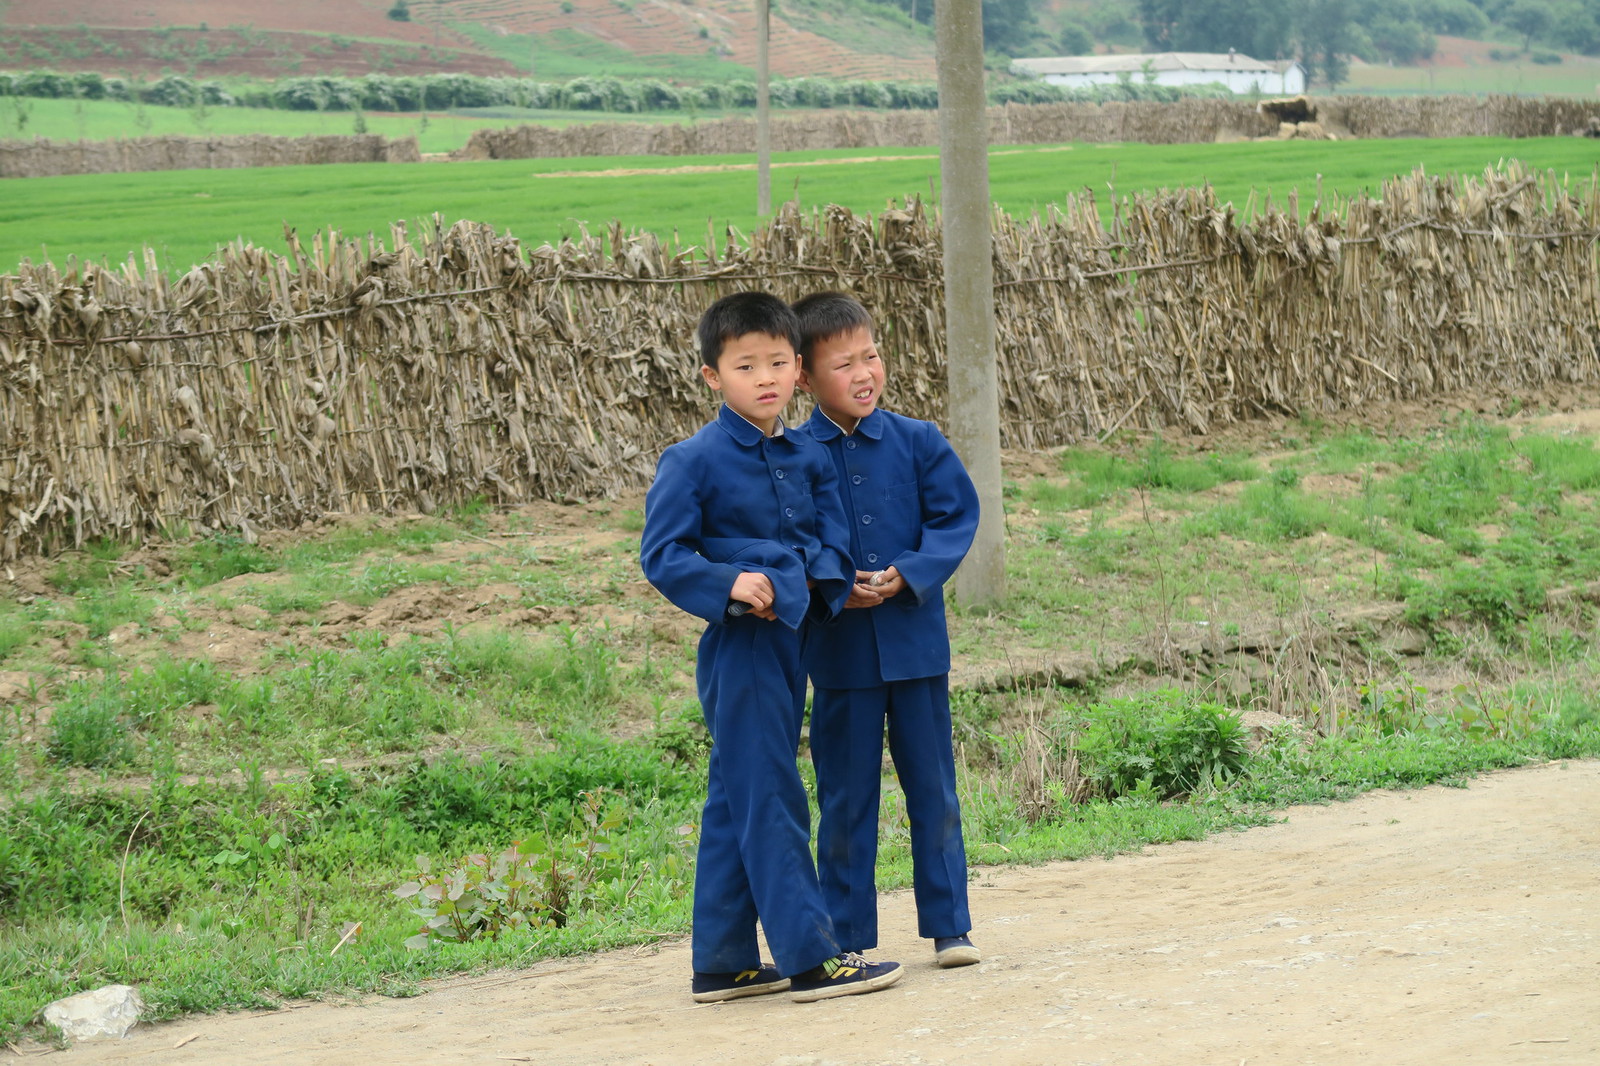 Humanitarian and civil society groups call on Congress to include North Korea aid exemptions in next COVID relief package